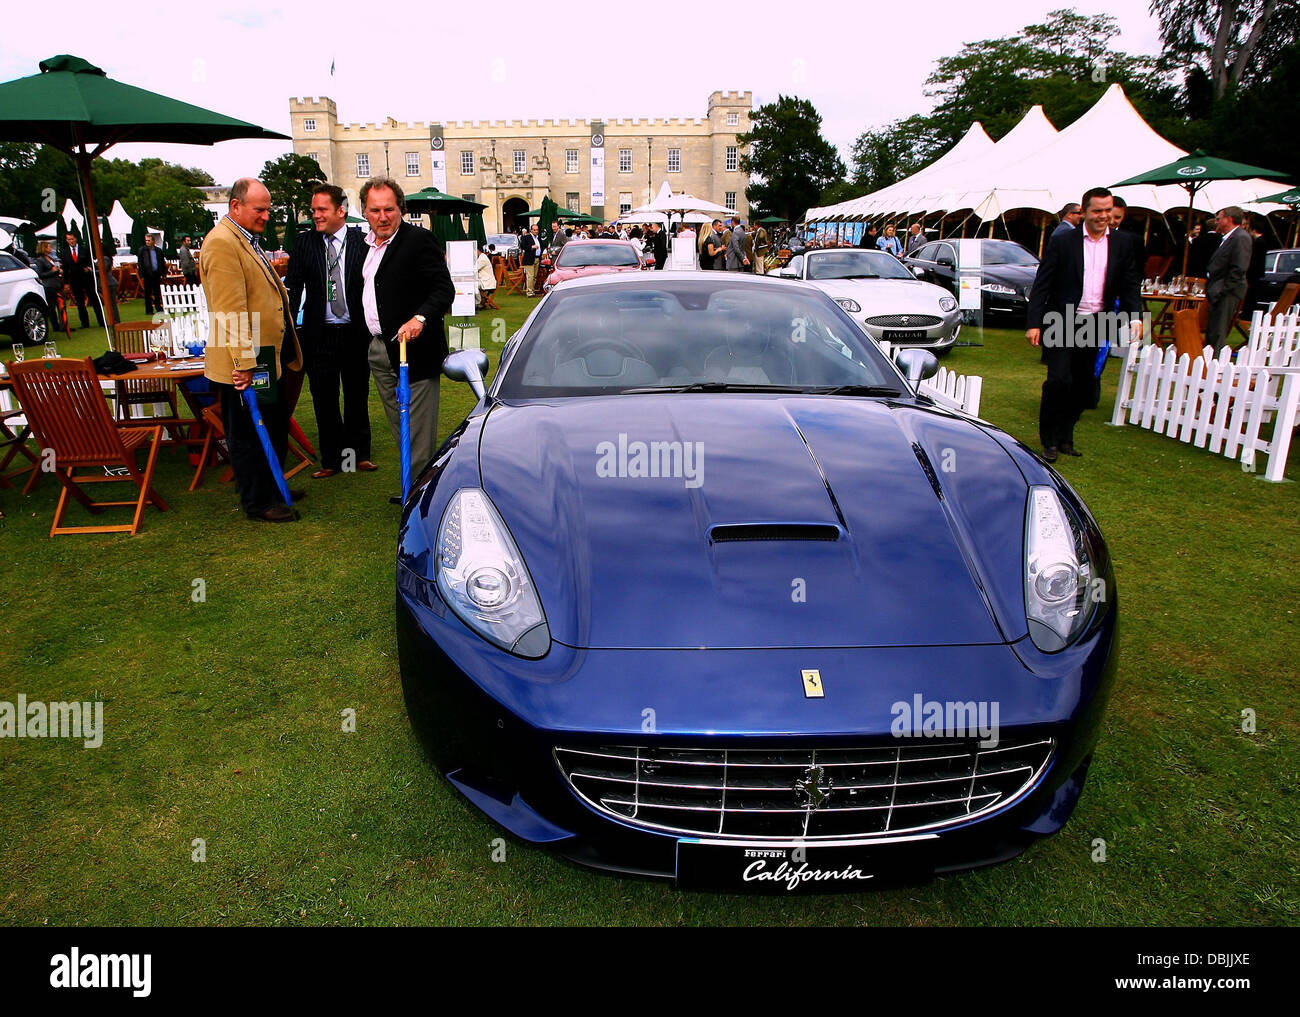 Ferrari California, The annual three day Salon Prive luxury and supercar  event, viewing the most exotic modern and vintage super cars in the world  held for the first time at Syon Park.